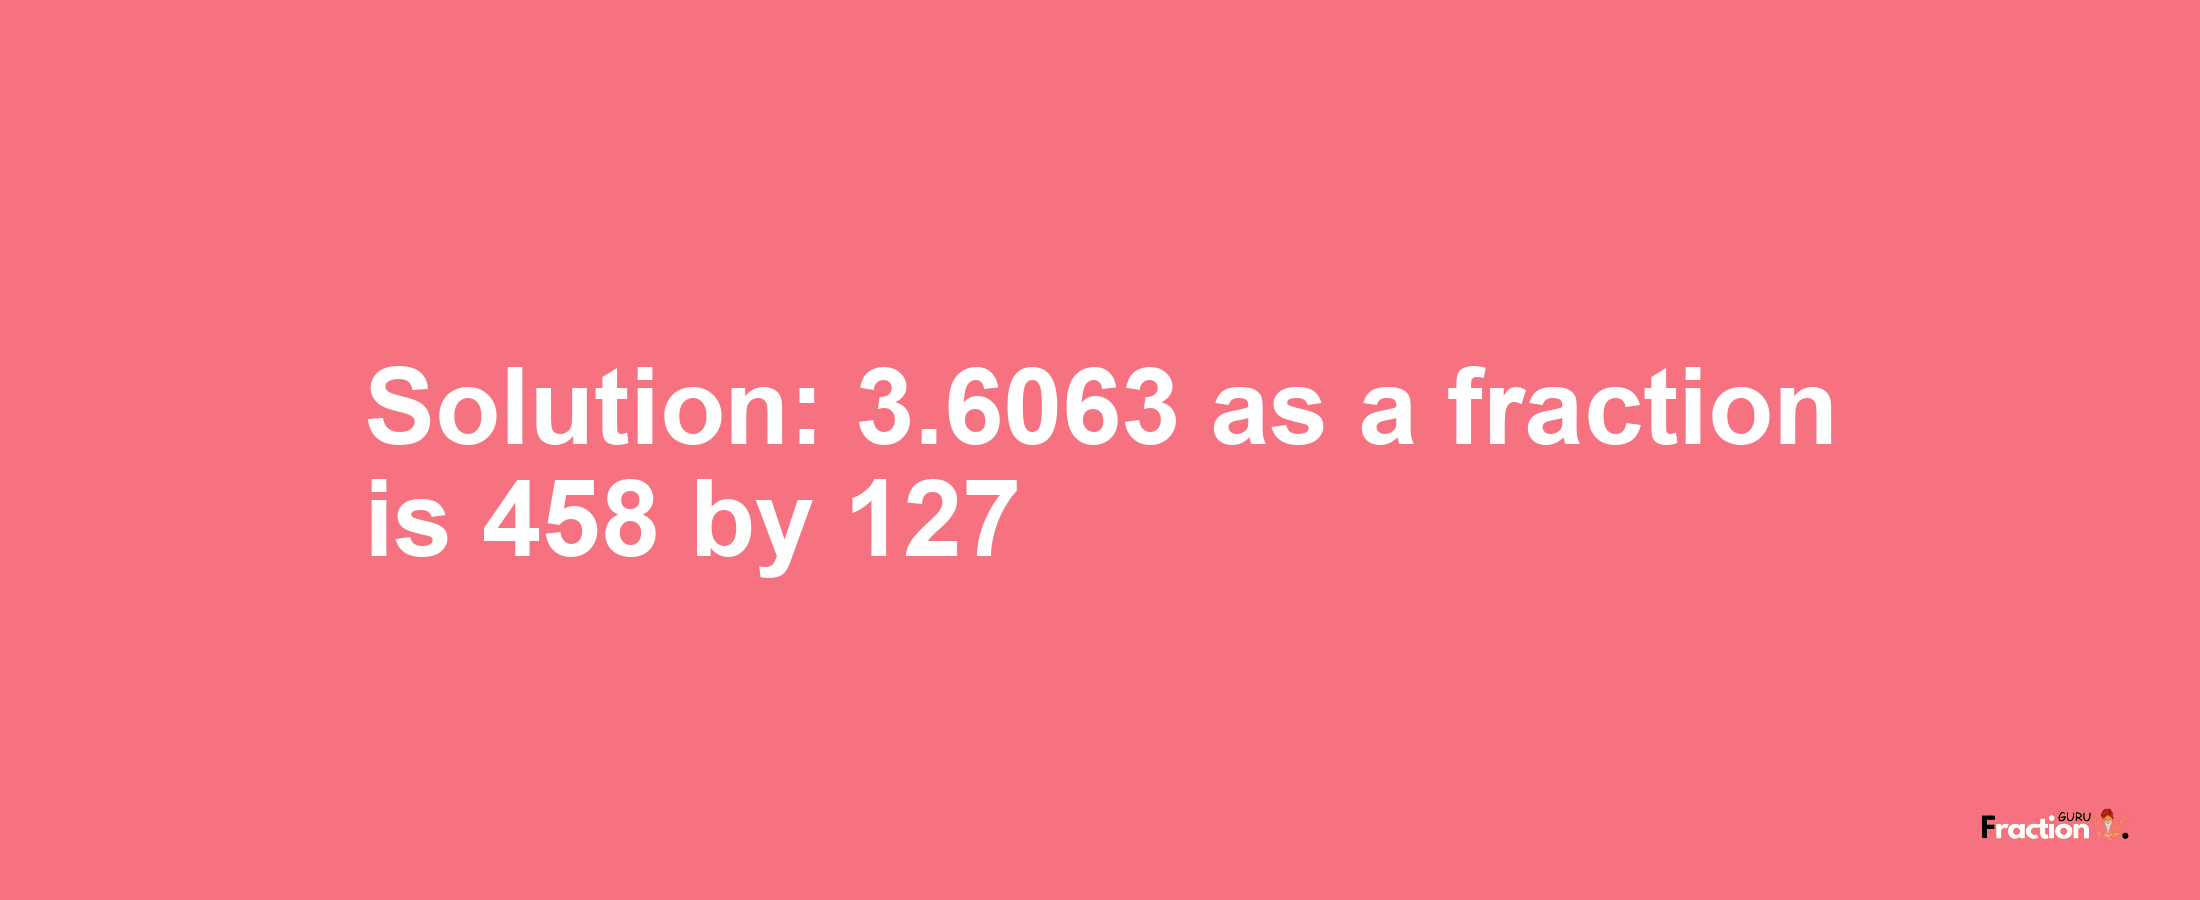 Solution:3.6063 as a fraction is 458/127